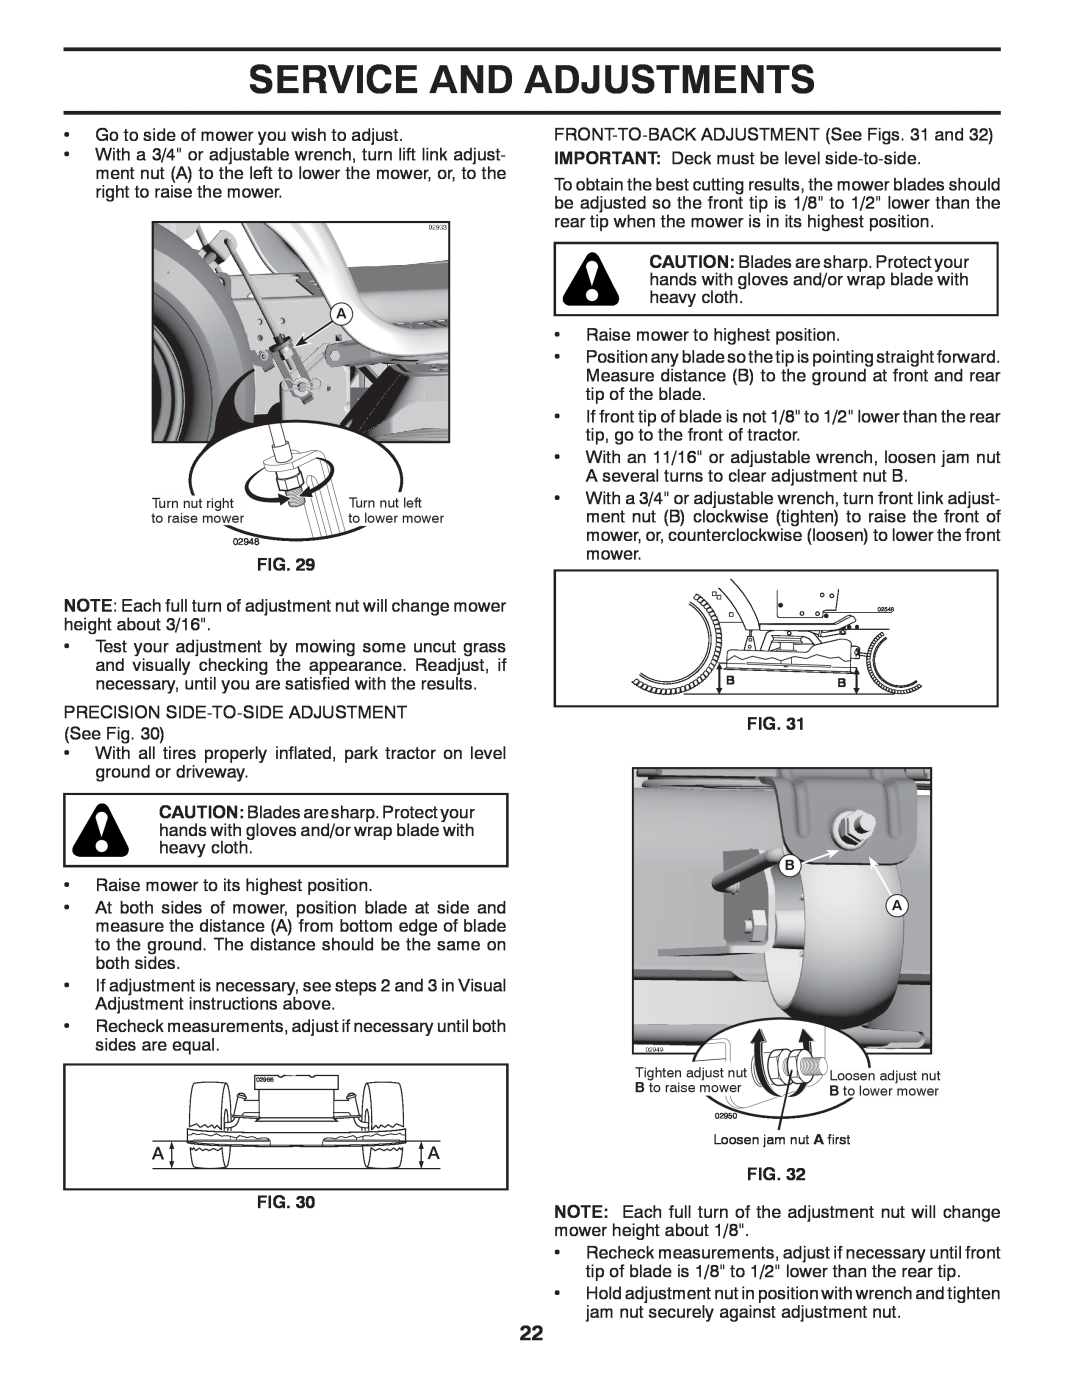 Poulan 423349 manual Service And Adjustments, Turn nut right, Turn nut left, Tighten adjust nut, B to raise mower 